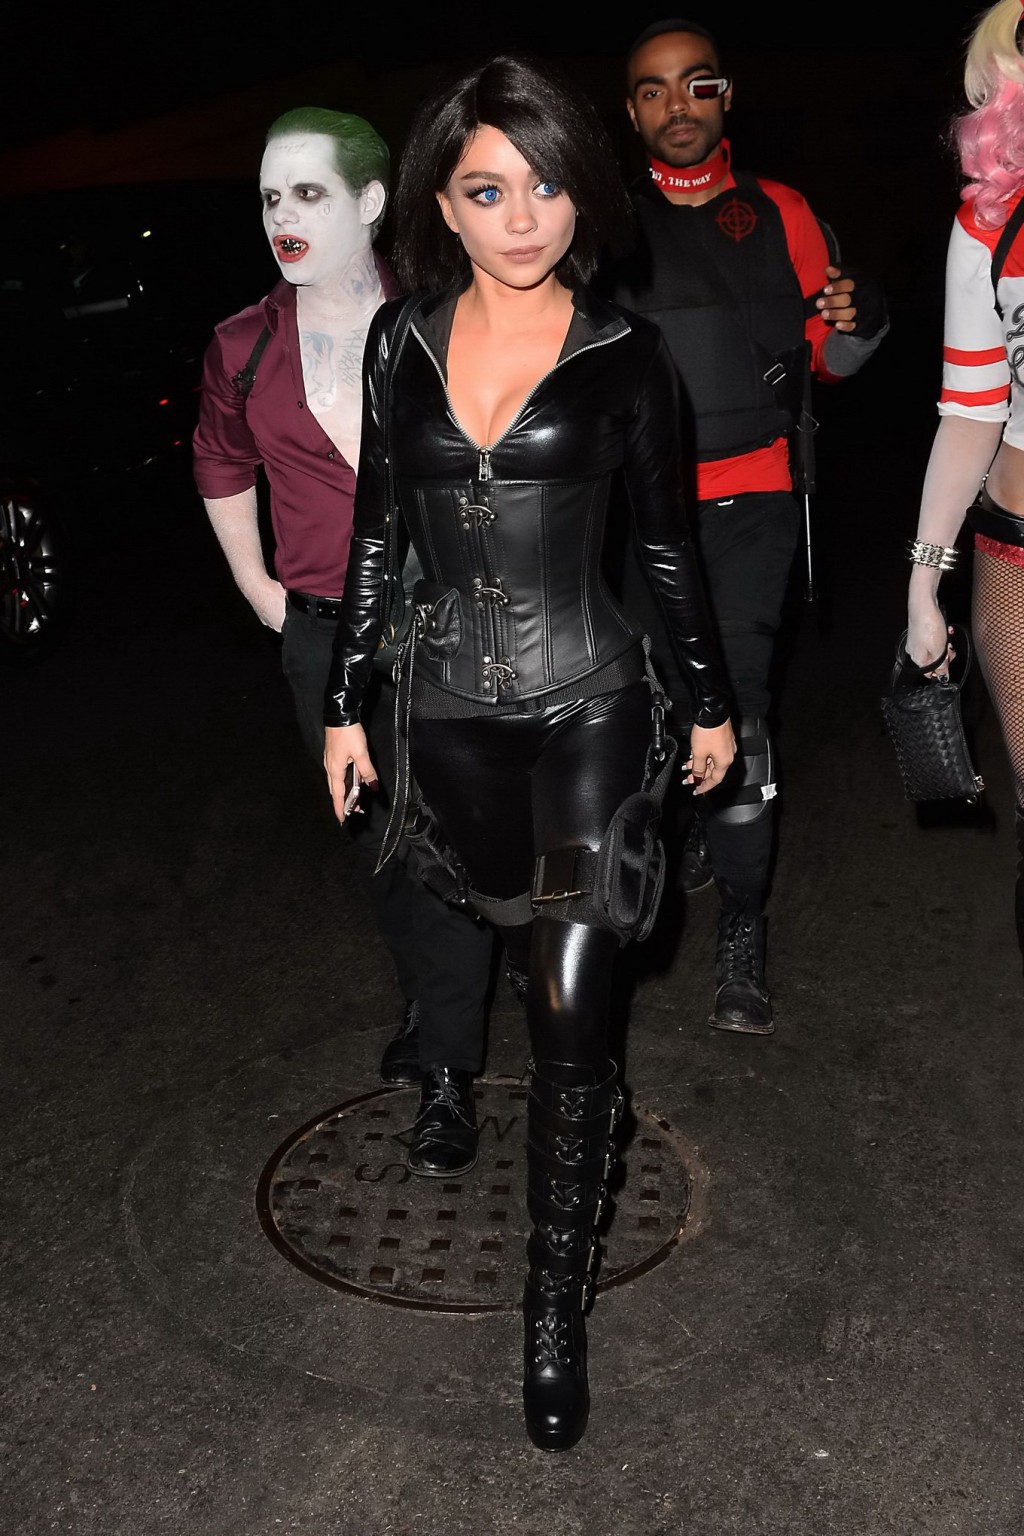 Sarah Hyland stunning in tight black leather for Halloween #75150492